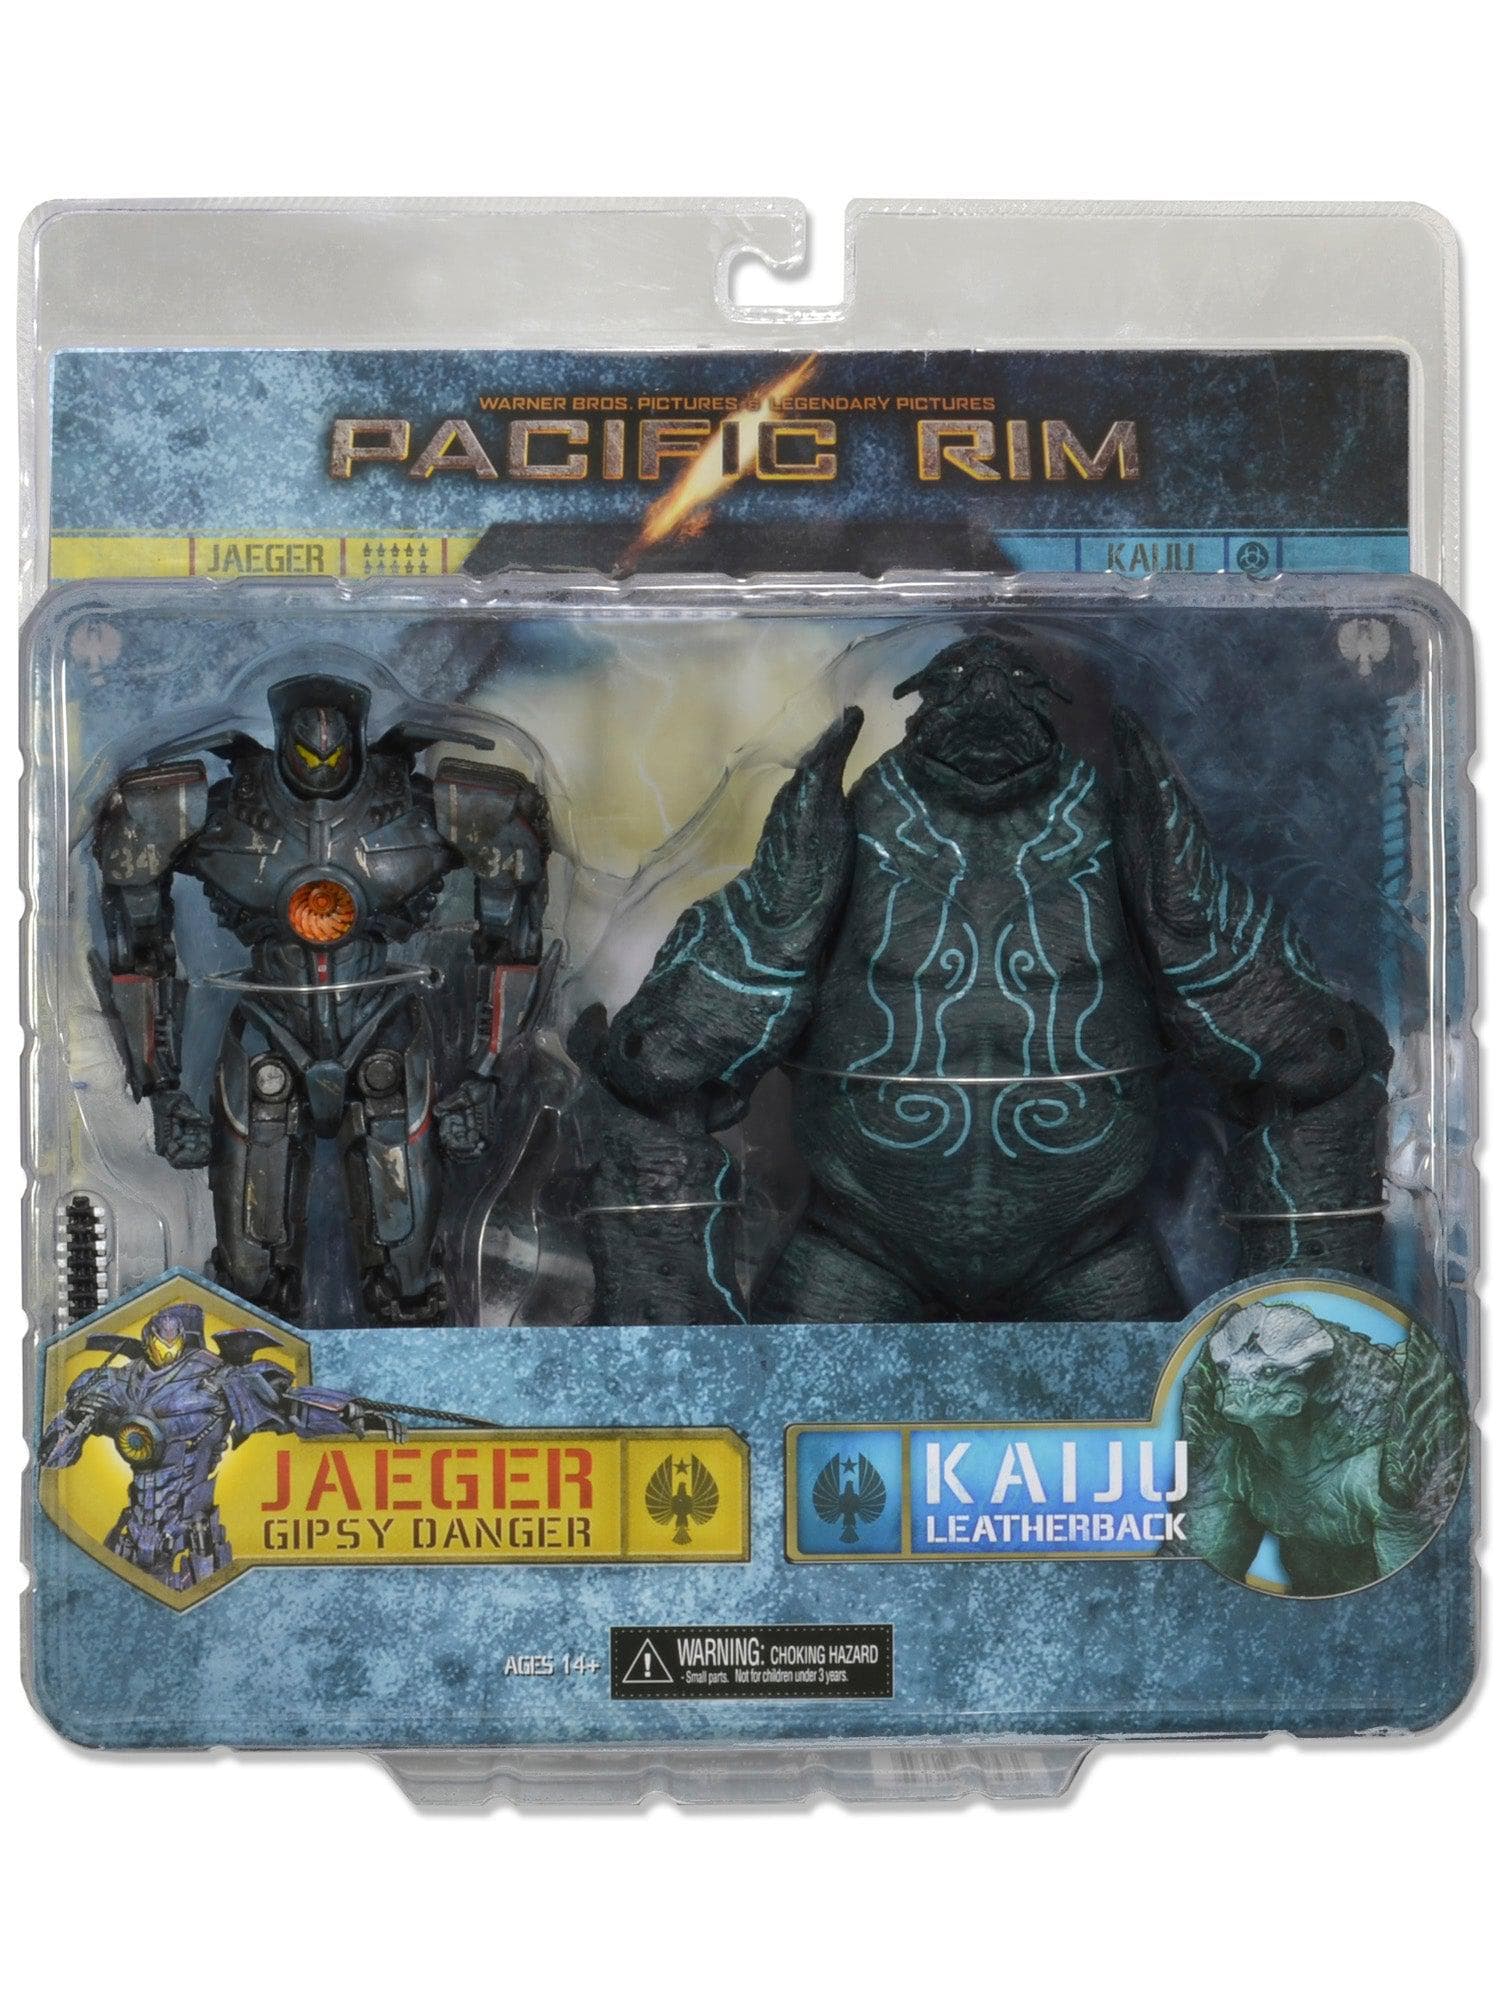 NECA - Pacific Rim - 7" Action Figures - Gipsy Danger vs. Leatherback - 2 Pack - costumes.com